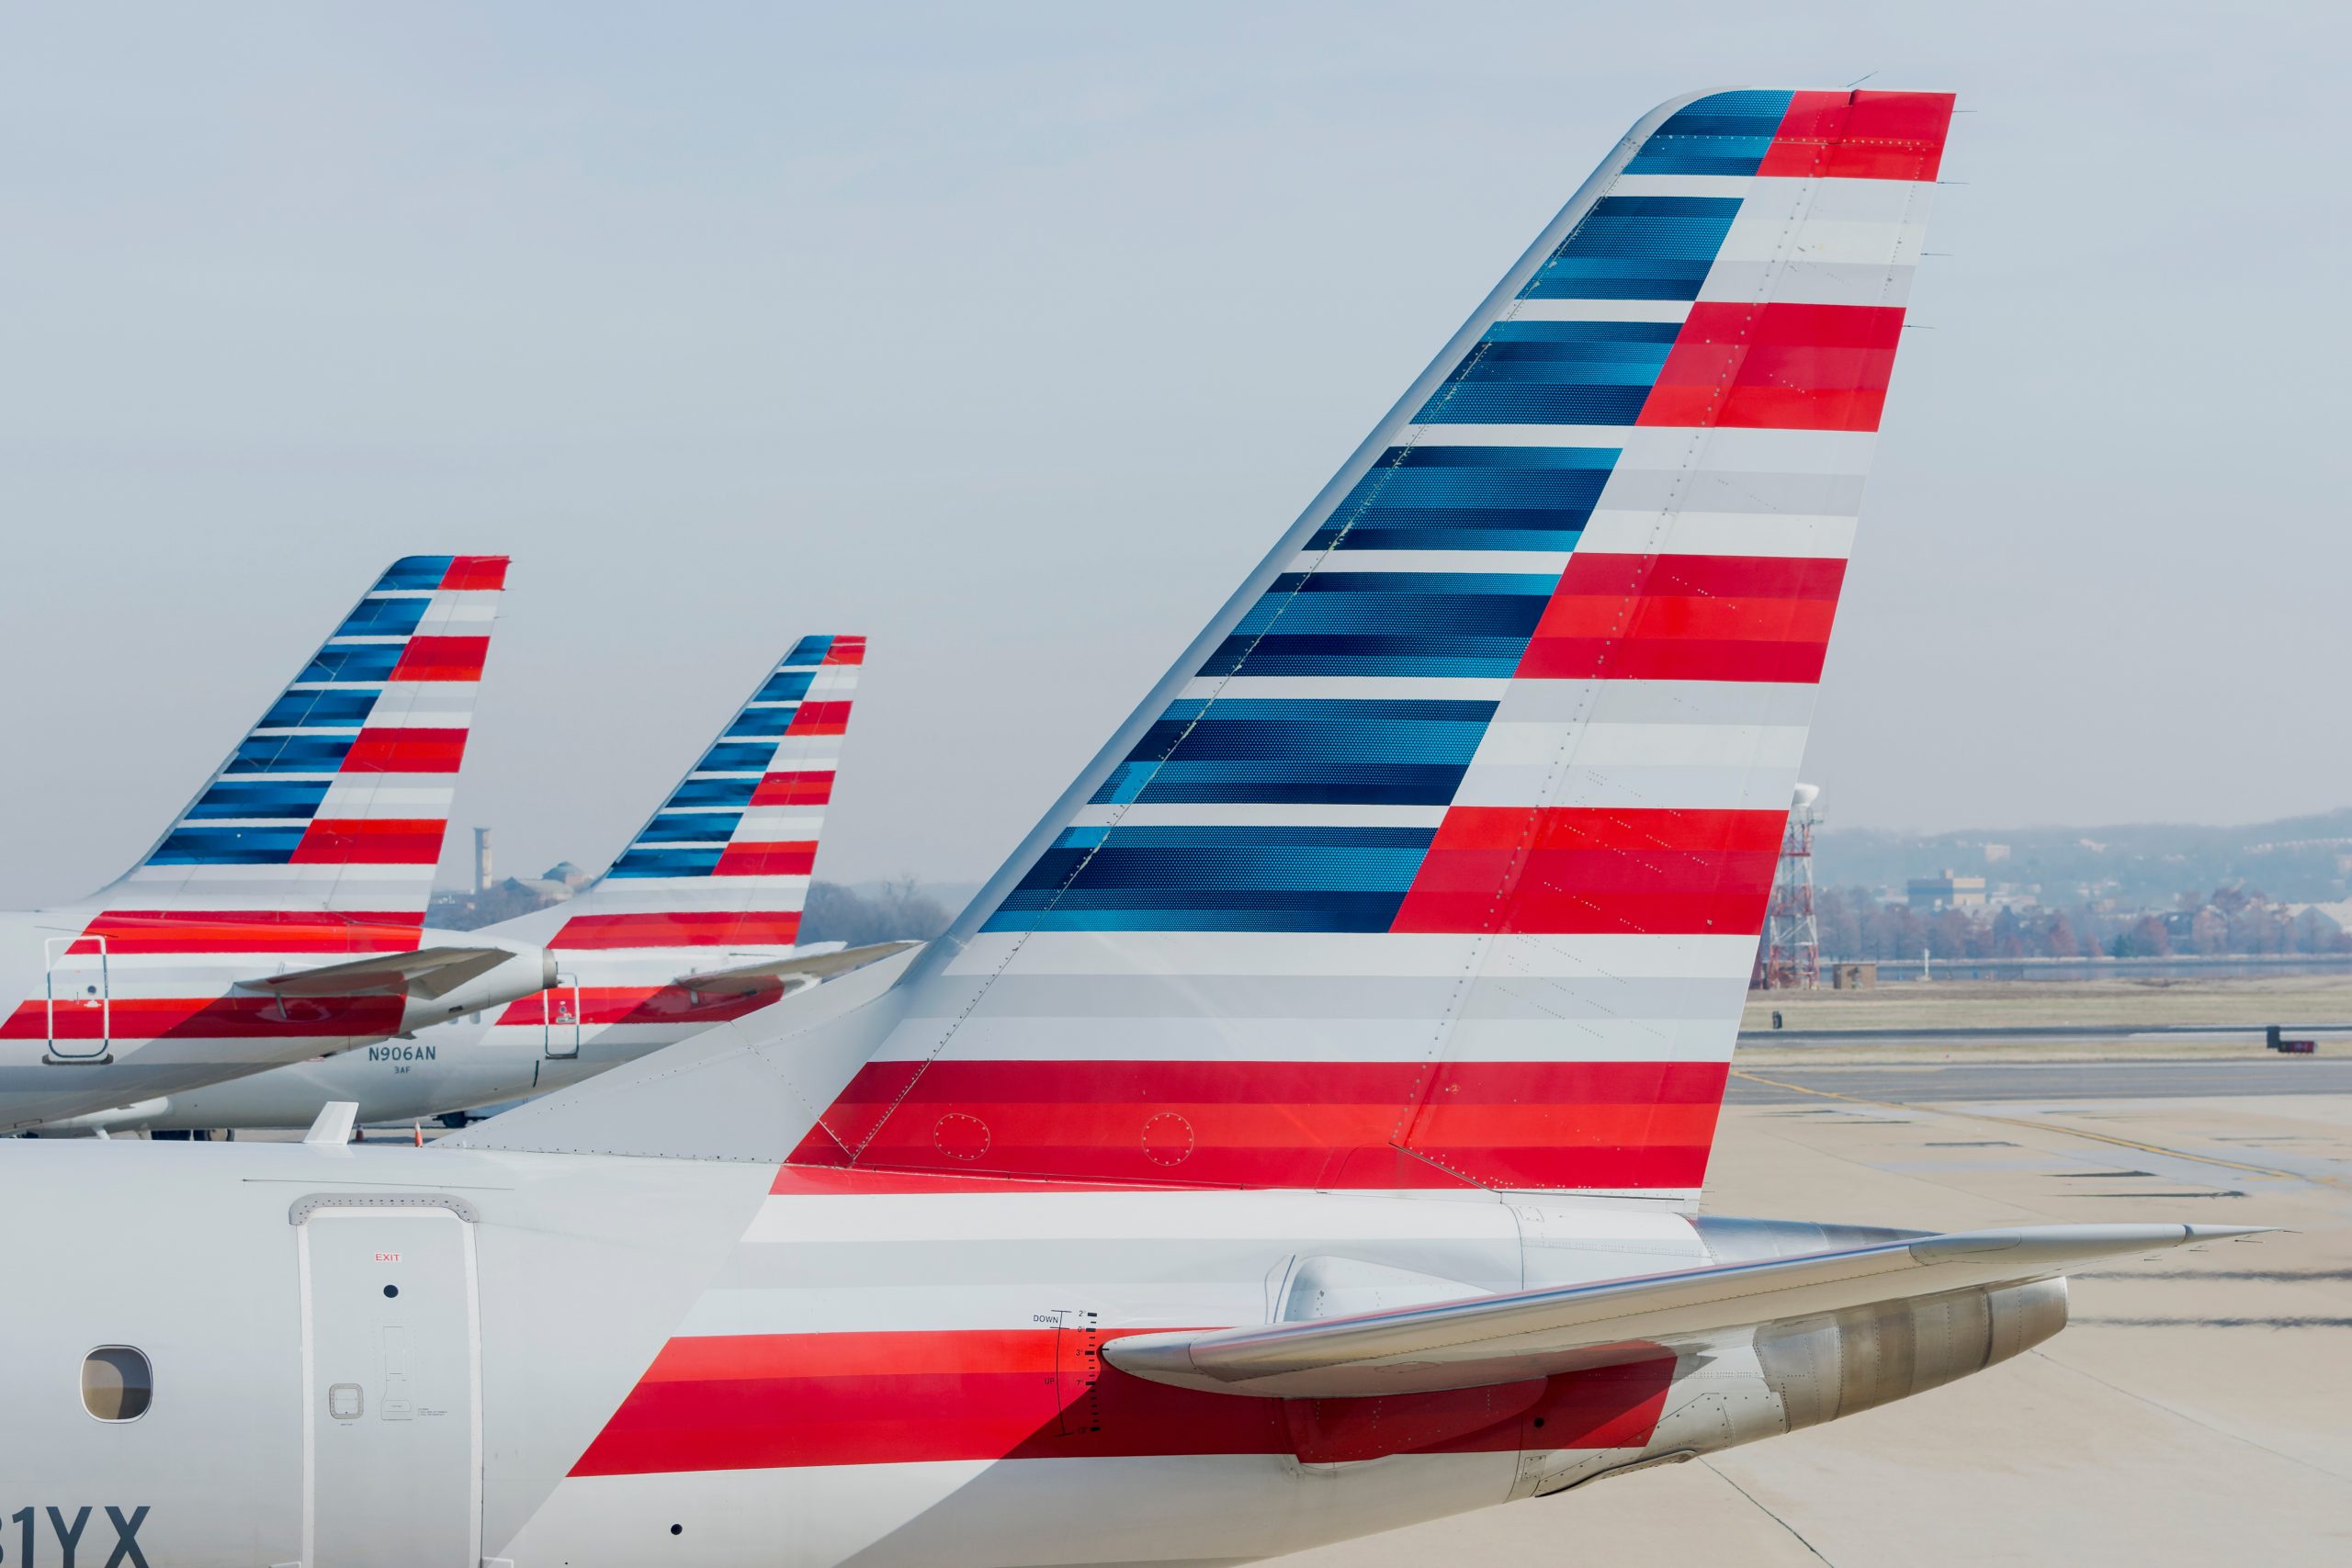 American Airlines Offering Flight Attendants Big Bonuses Not to Go Sick Over Hol..